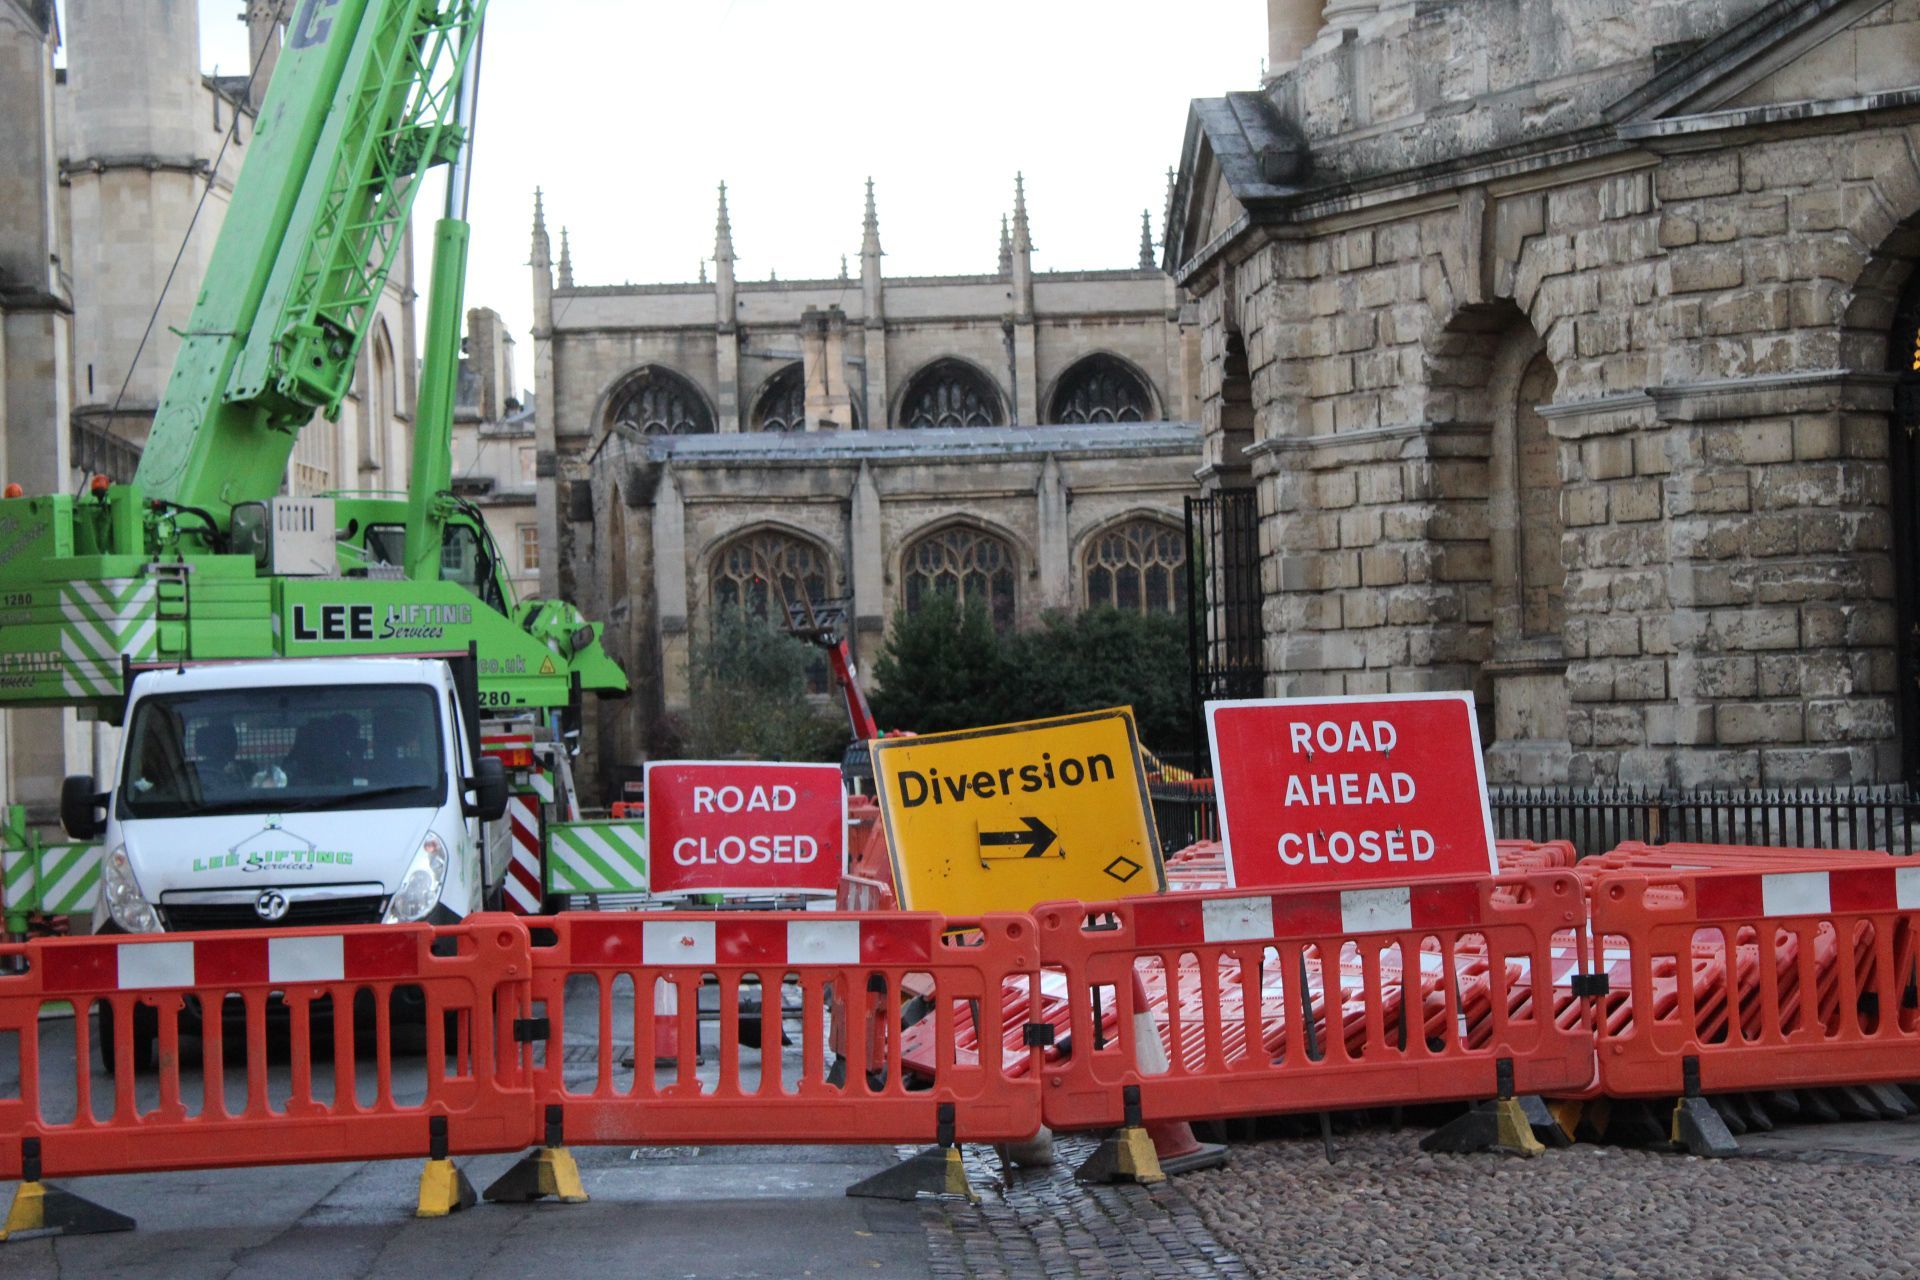 Workmen begin setting up for filming what is understood to be the new Willy Wonka film in Oxfords Radcliffe Square